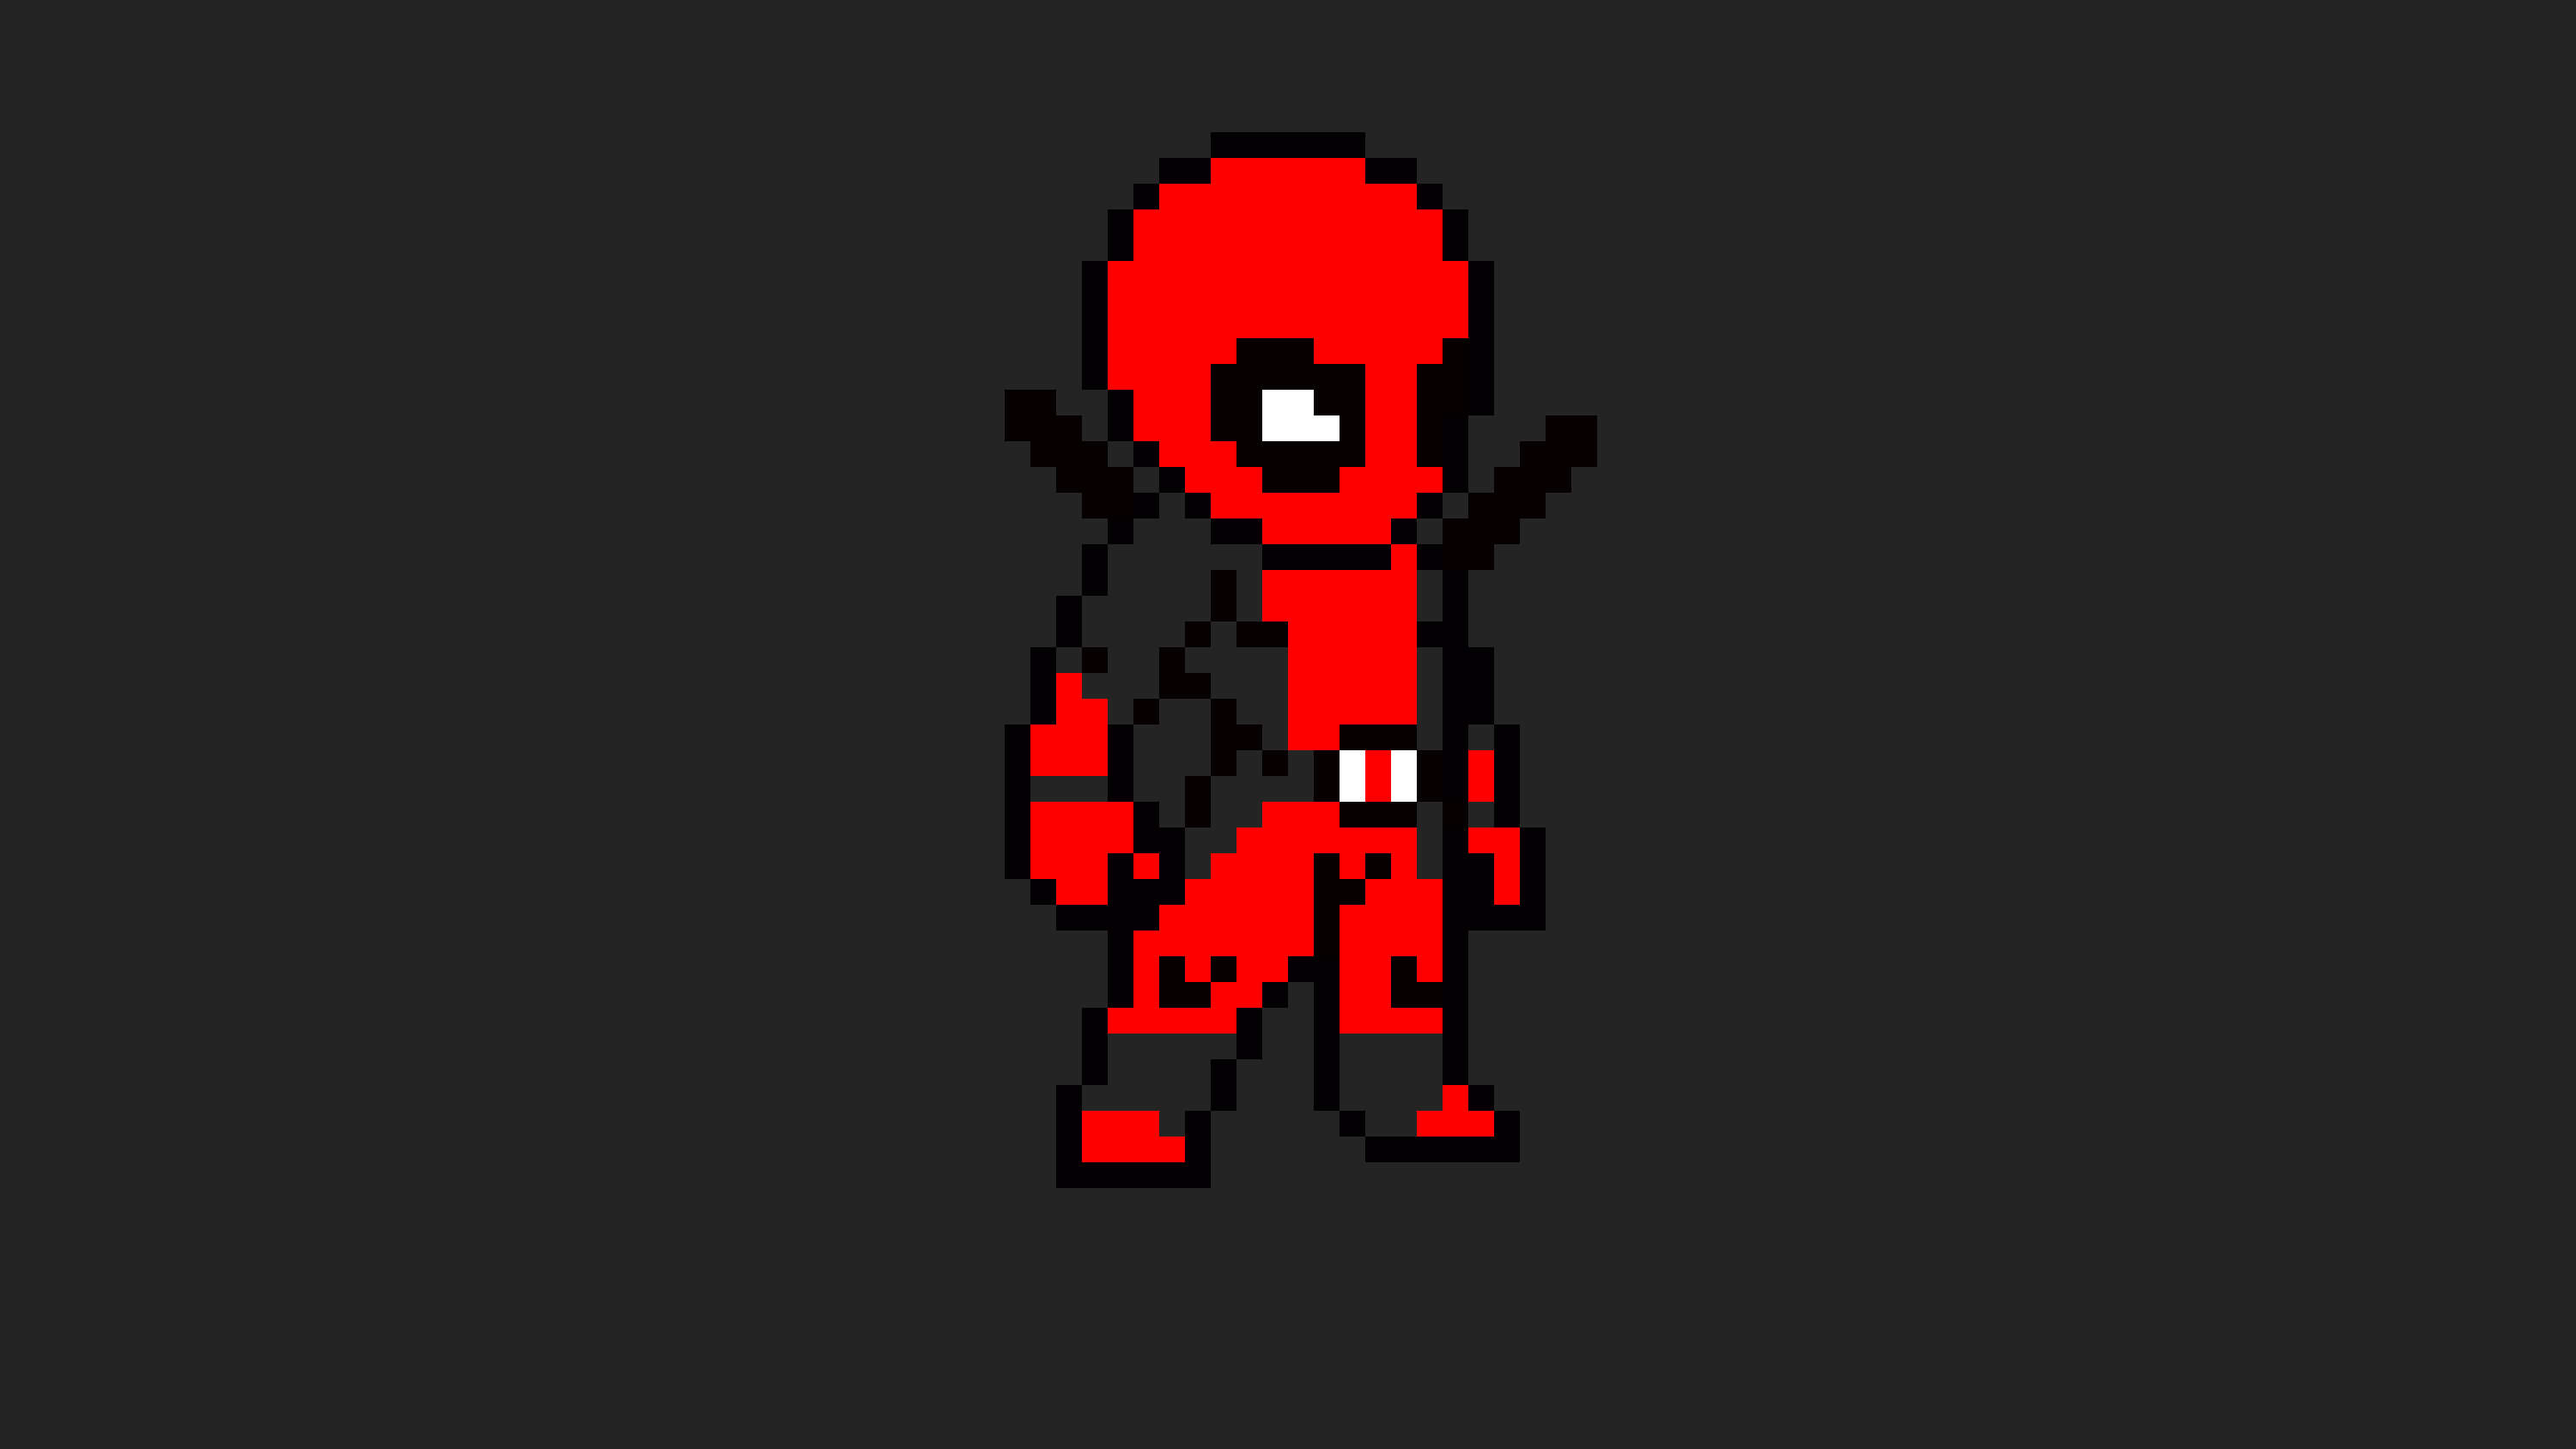 Deadpool 8 Bit Art, HD Superheroes, 4k Wallpaper, Image, Background, Photo and Picture